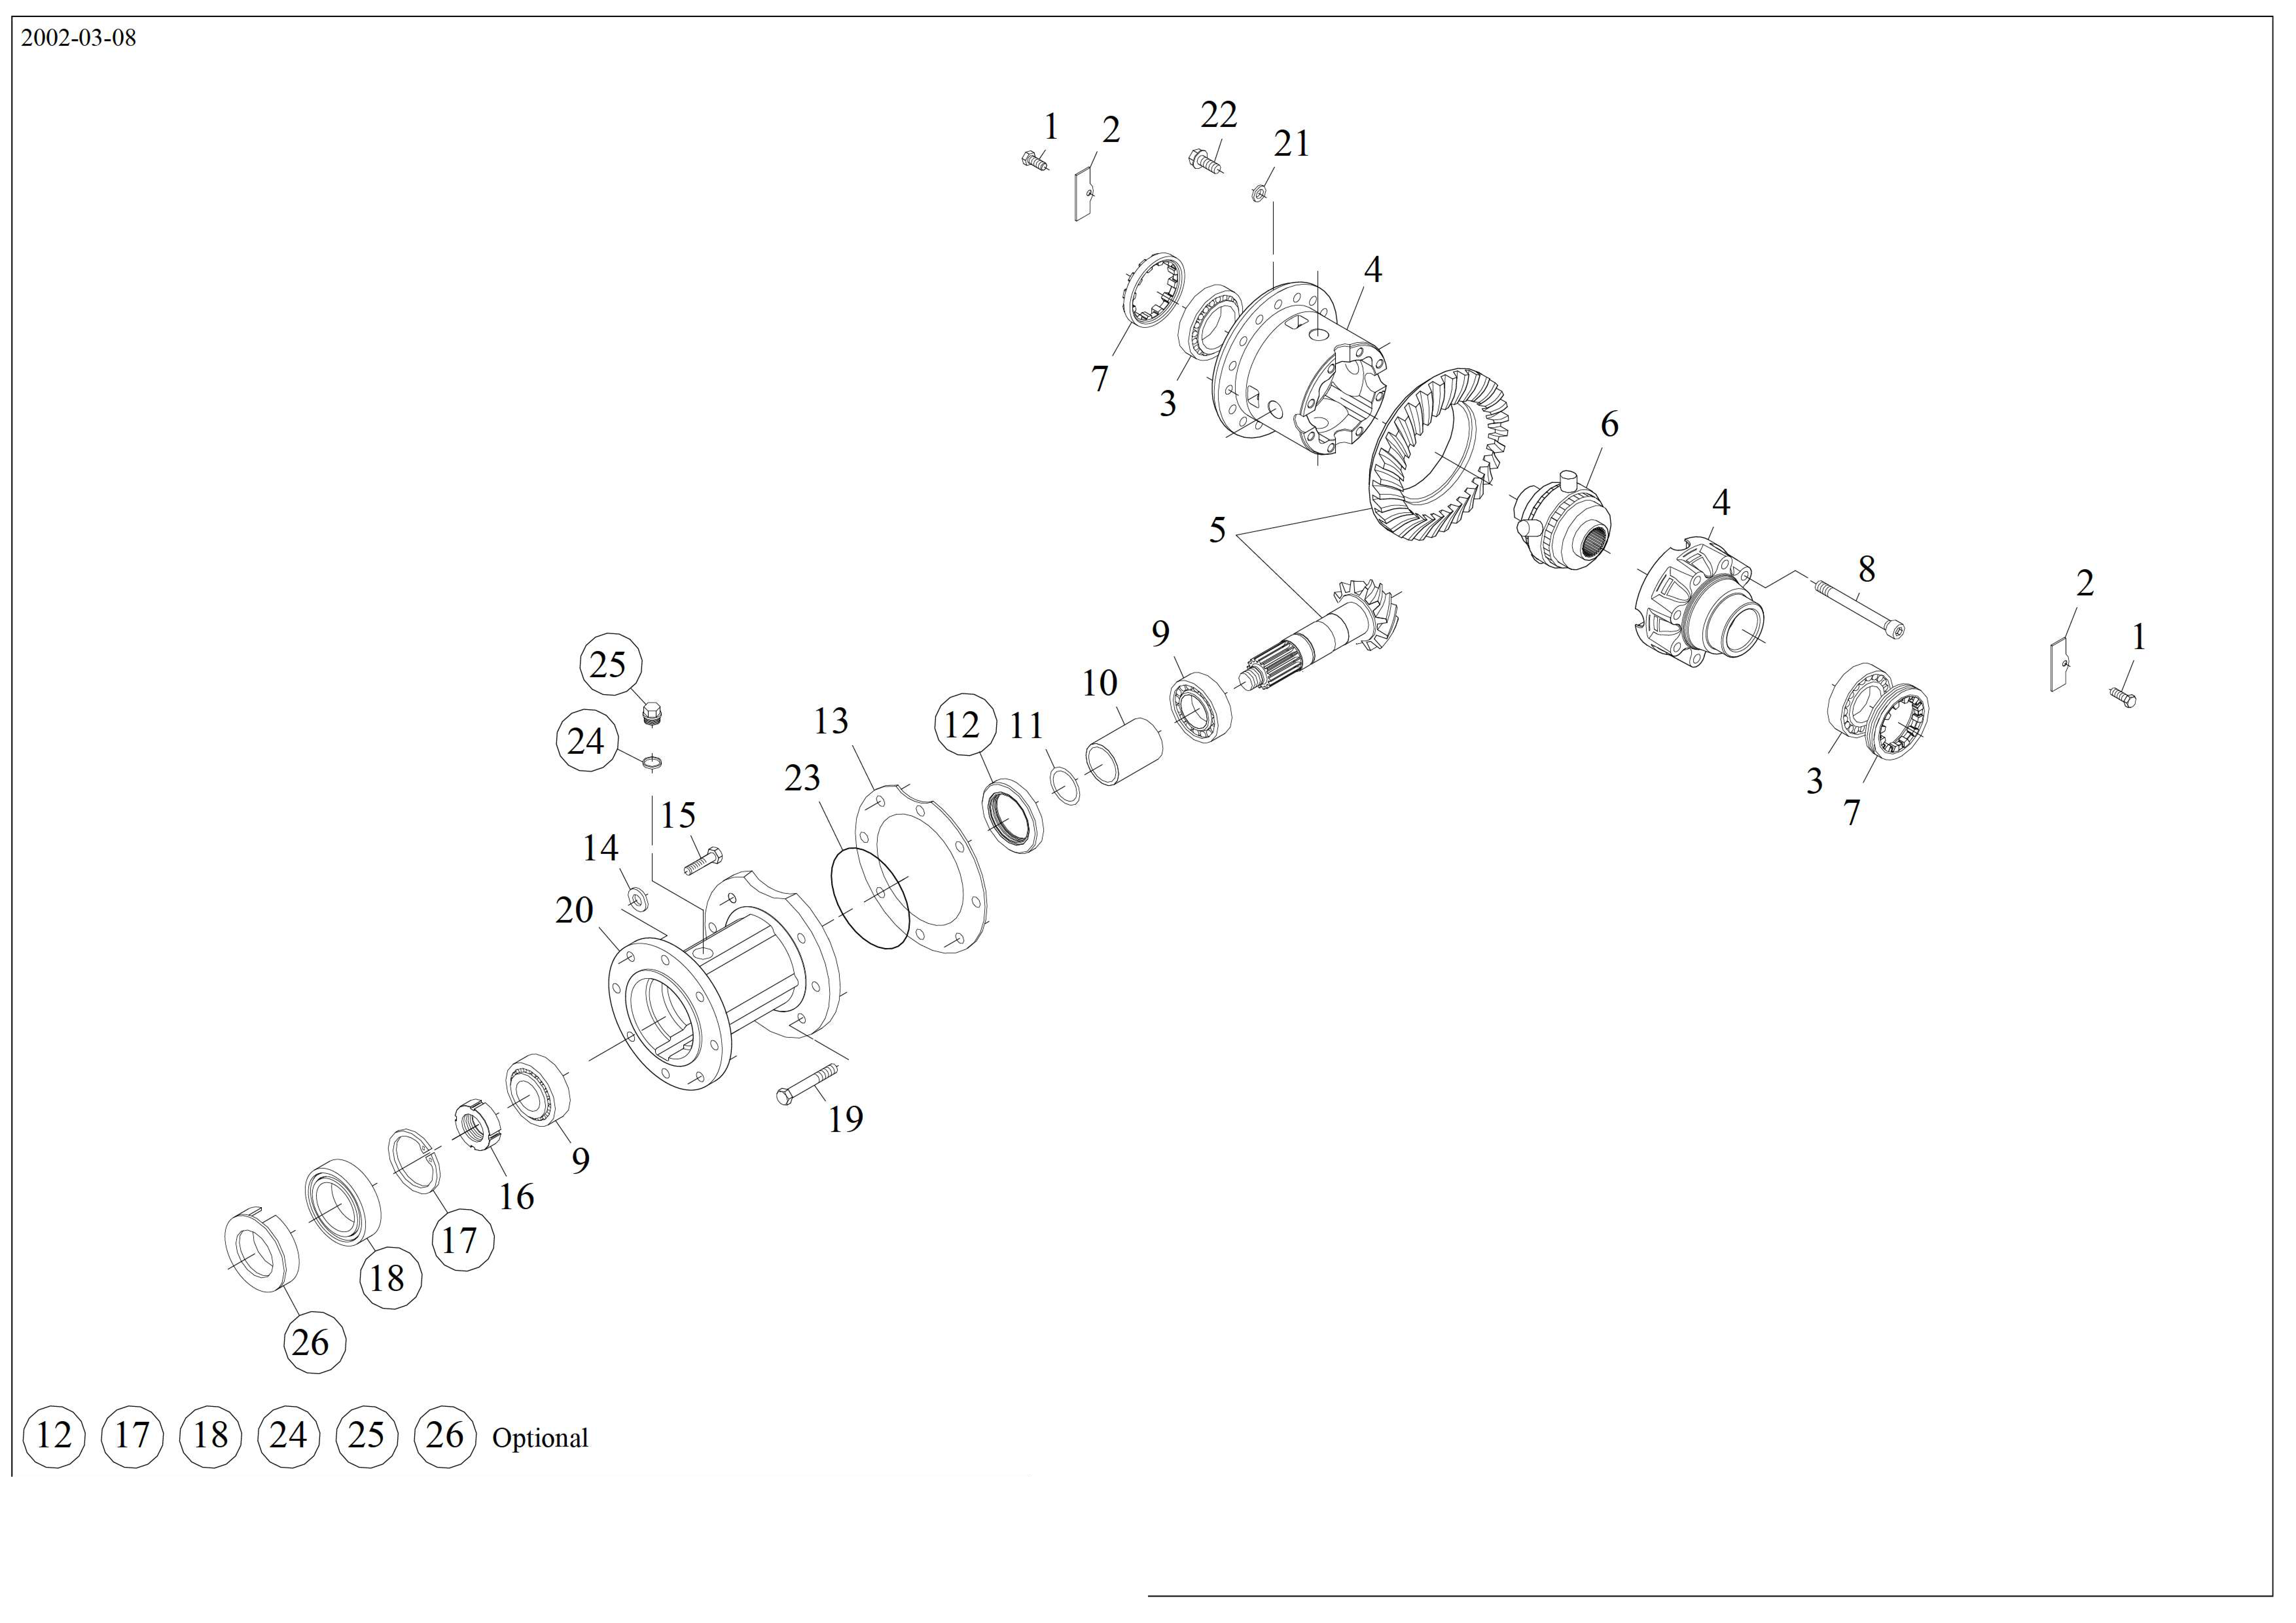 drawing for BUCYRUS 015424-2-4 - BEARING (figure 1)